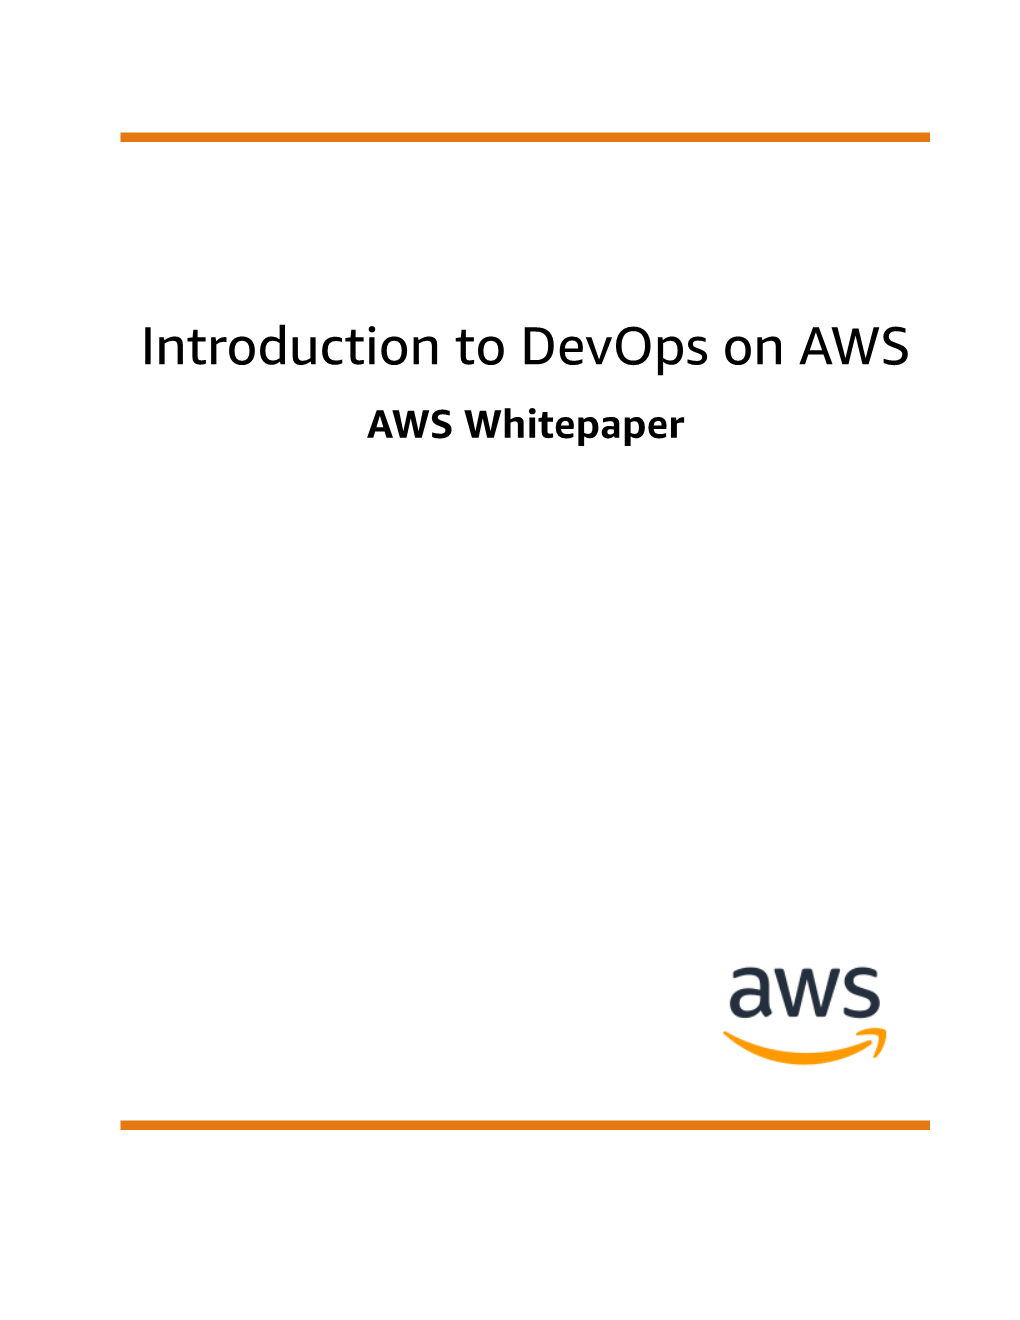 Introduction to Devops on AWS AWS Whitepaper Introduction to Devops on AWS AWS Whitepaper